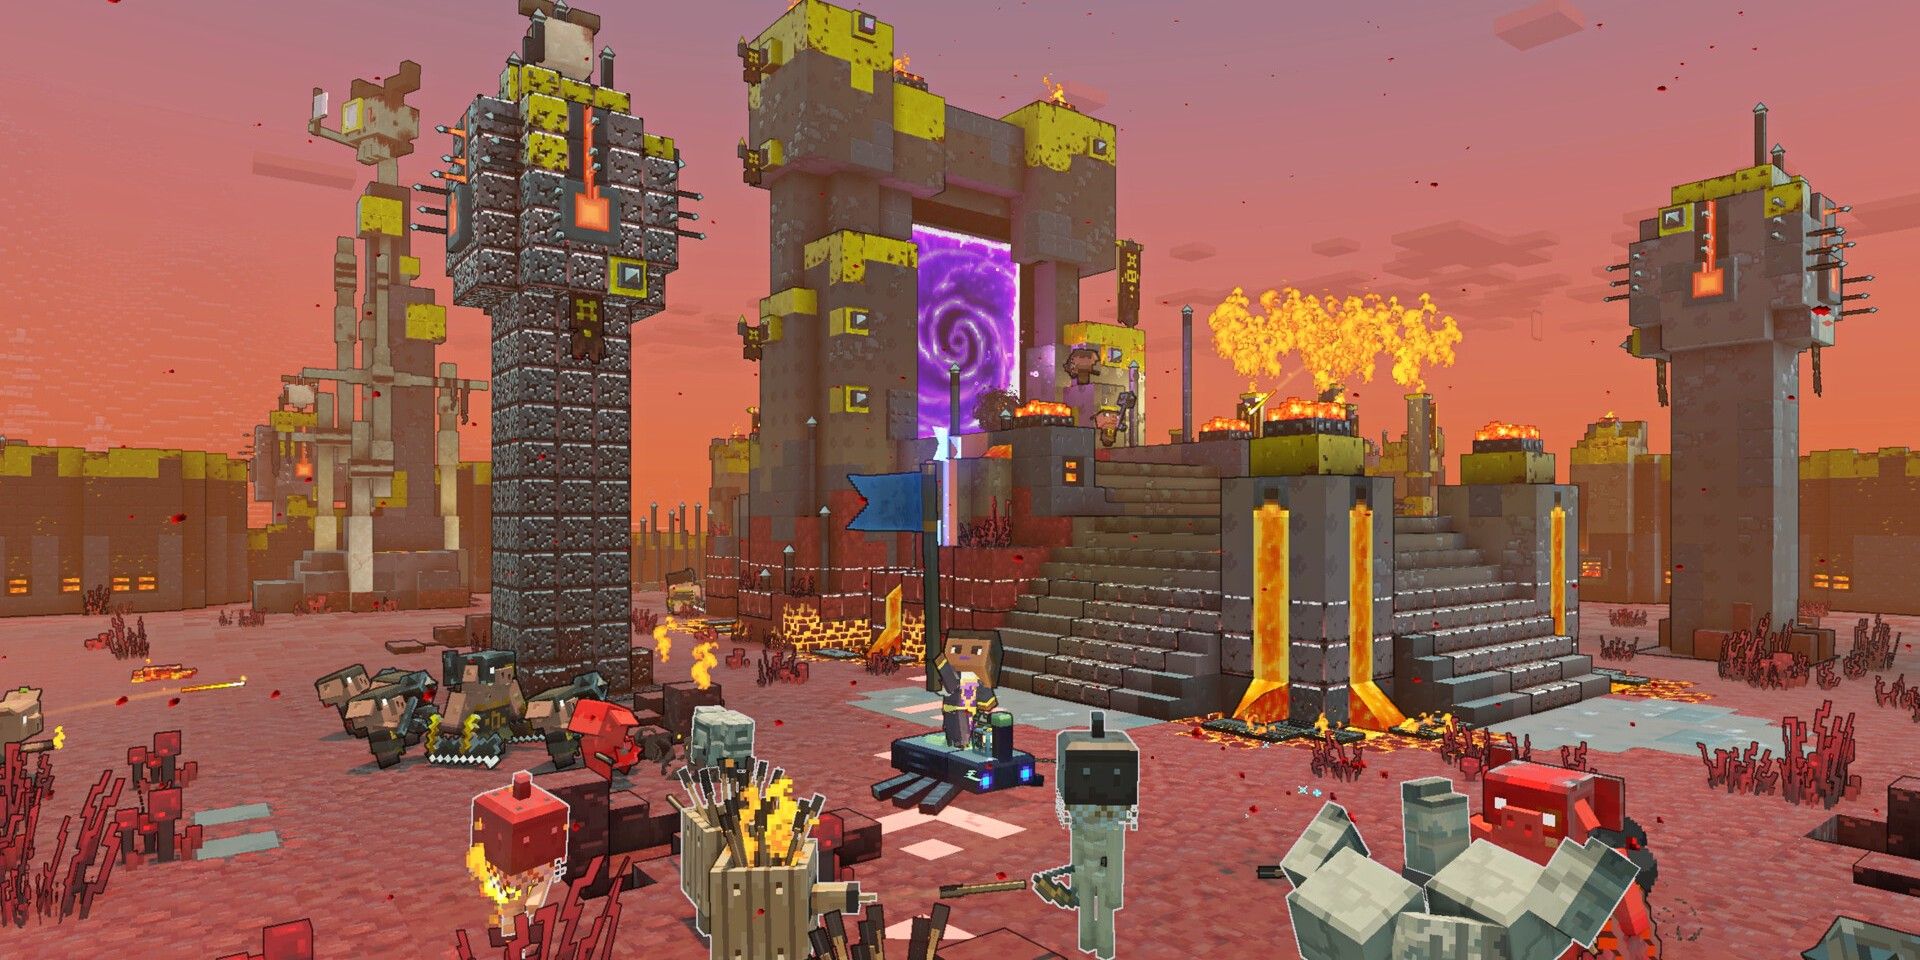 A player attacks a Piglin Nether portal with a stone golem army in Minecraft Legends.